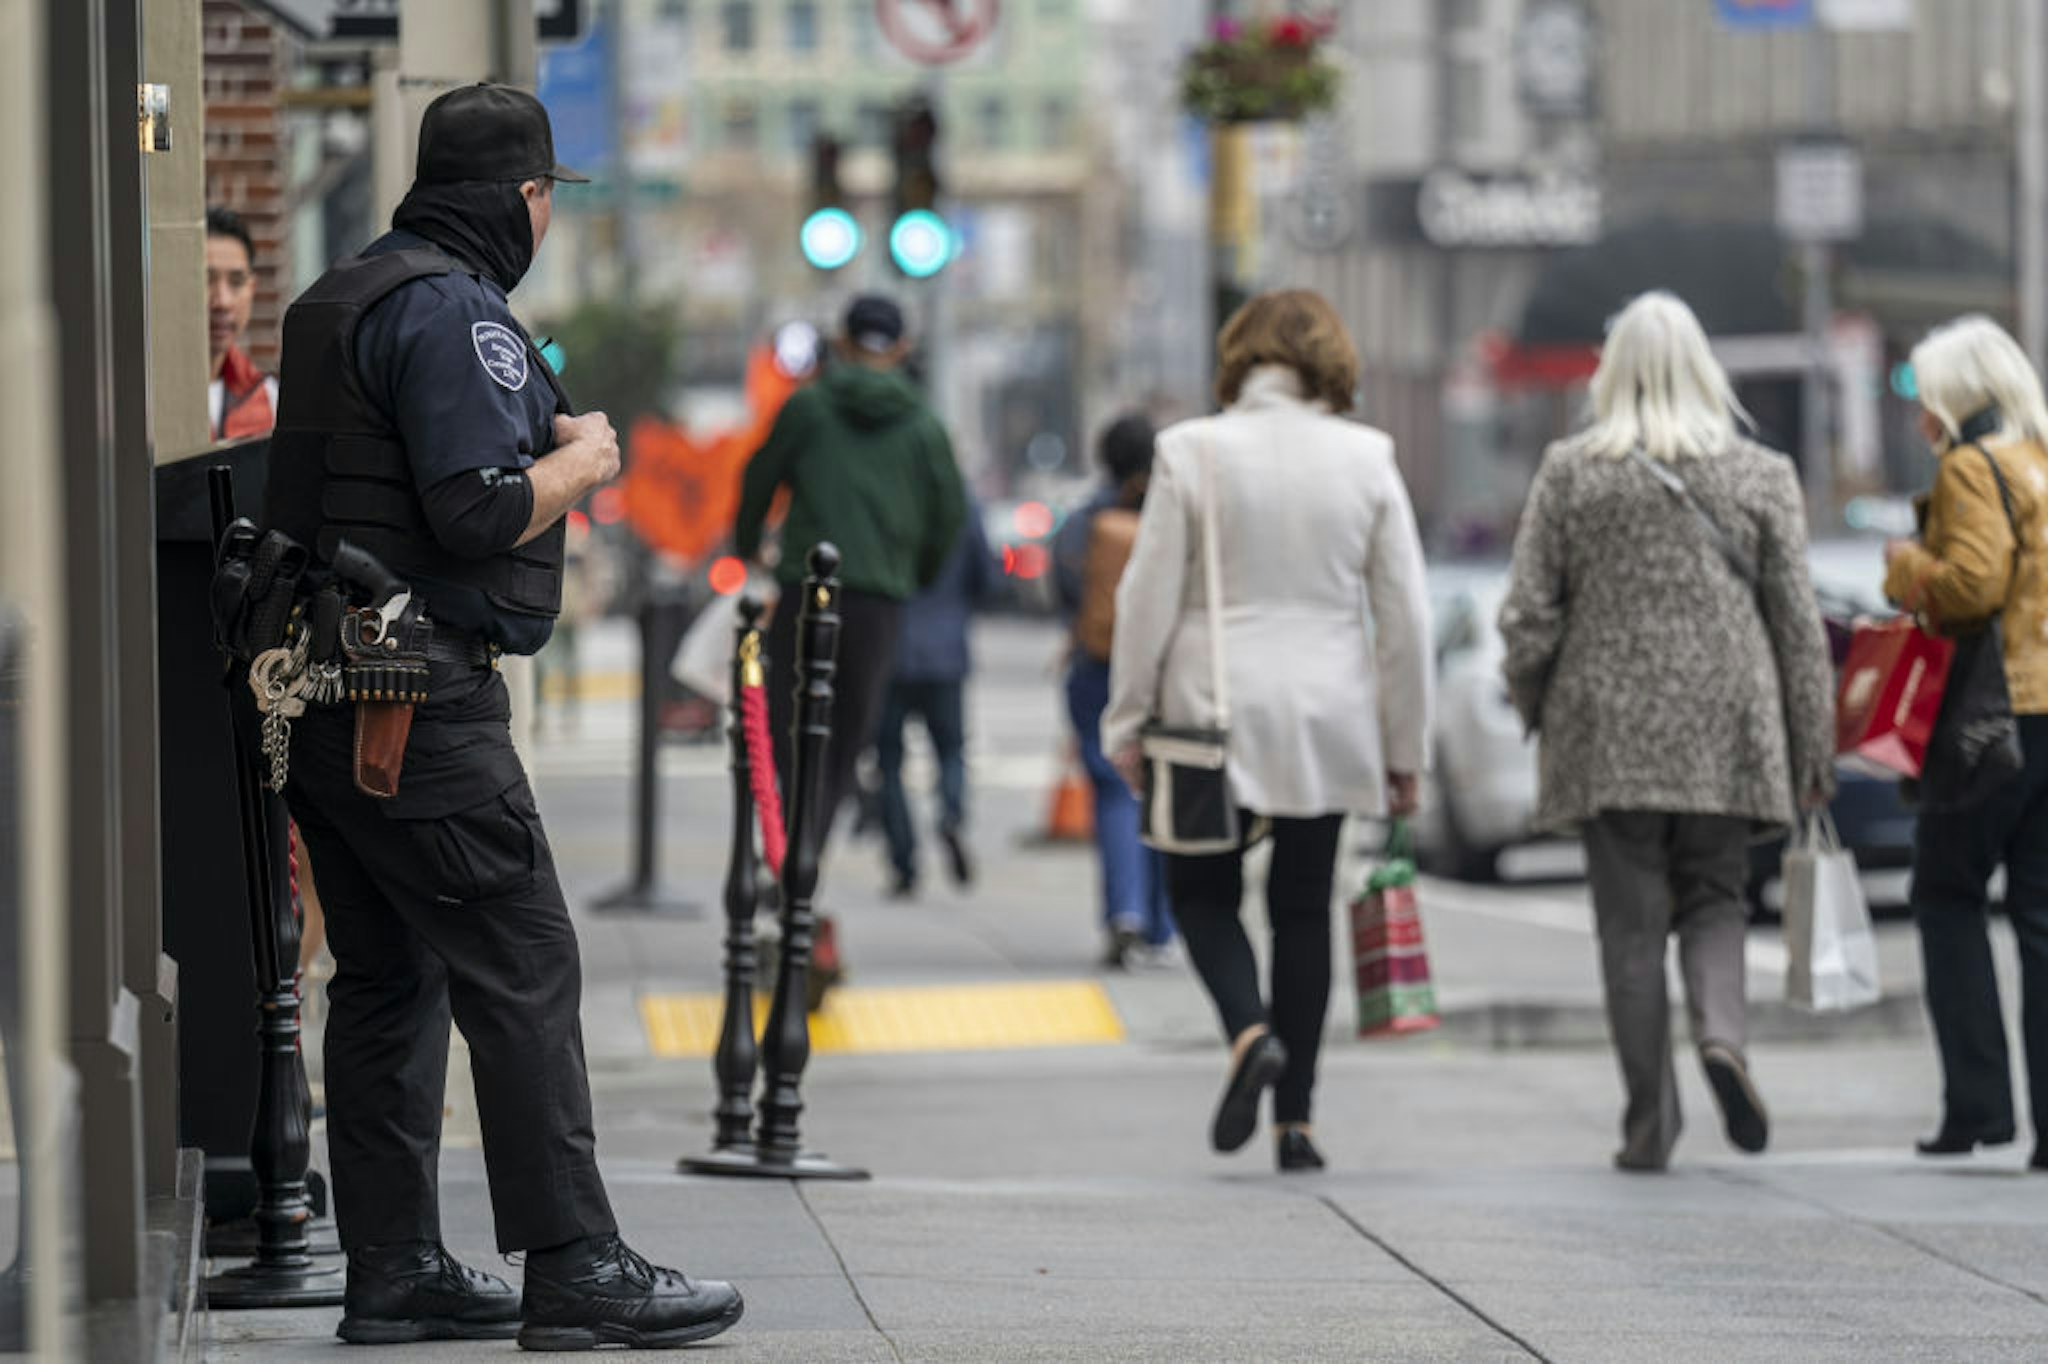 A security guard outside of a store in San Francisco, California, U.S., on Monday, Dec. 6, 2021. California Governor Gavin Newsom said that "the level of organized retail theft we are seeing is simply unacceptable" as he boosted police presence in major retail sites. Photographer: David Paul Morris/Bloomberg via Getty Images